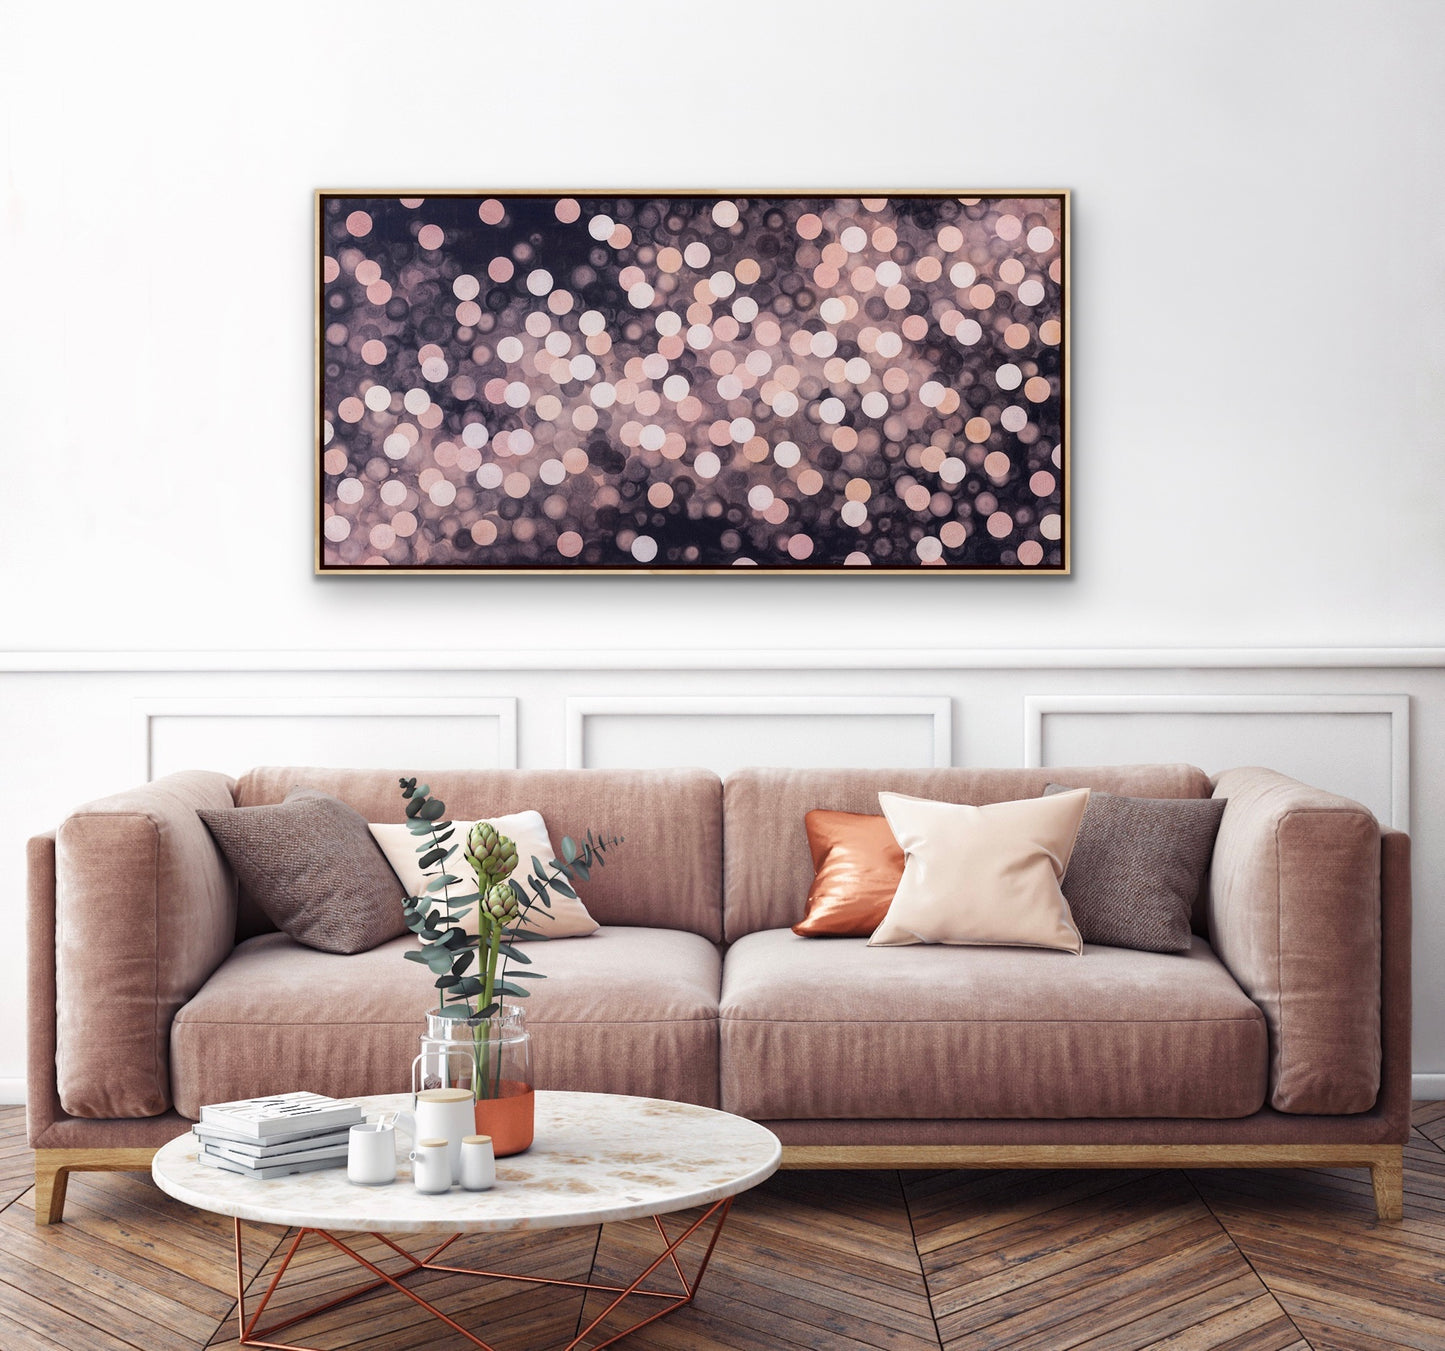 There was Something in the Air VII - Abstract Lights Painting 61cm x 122cm